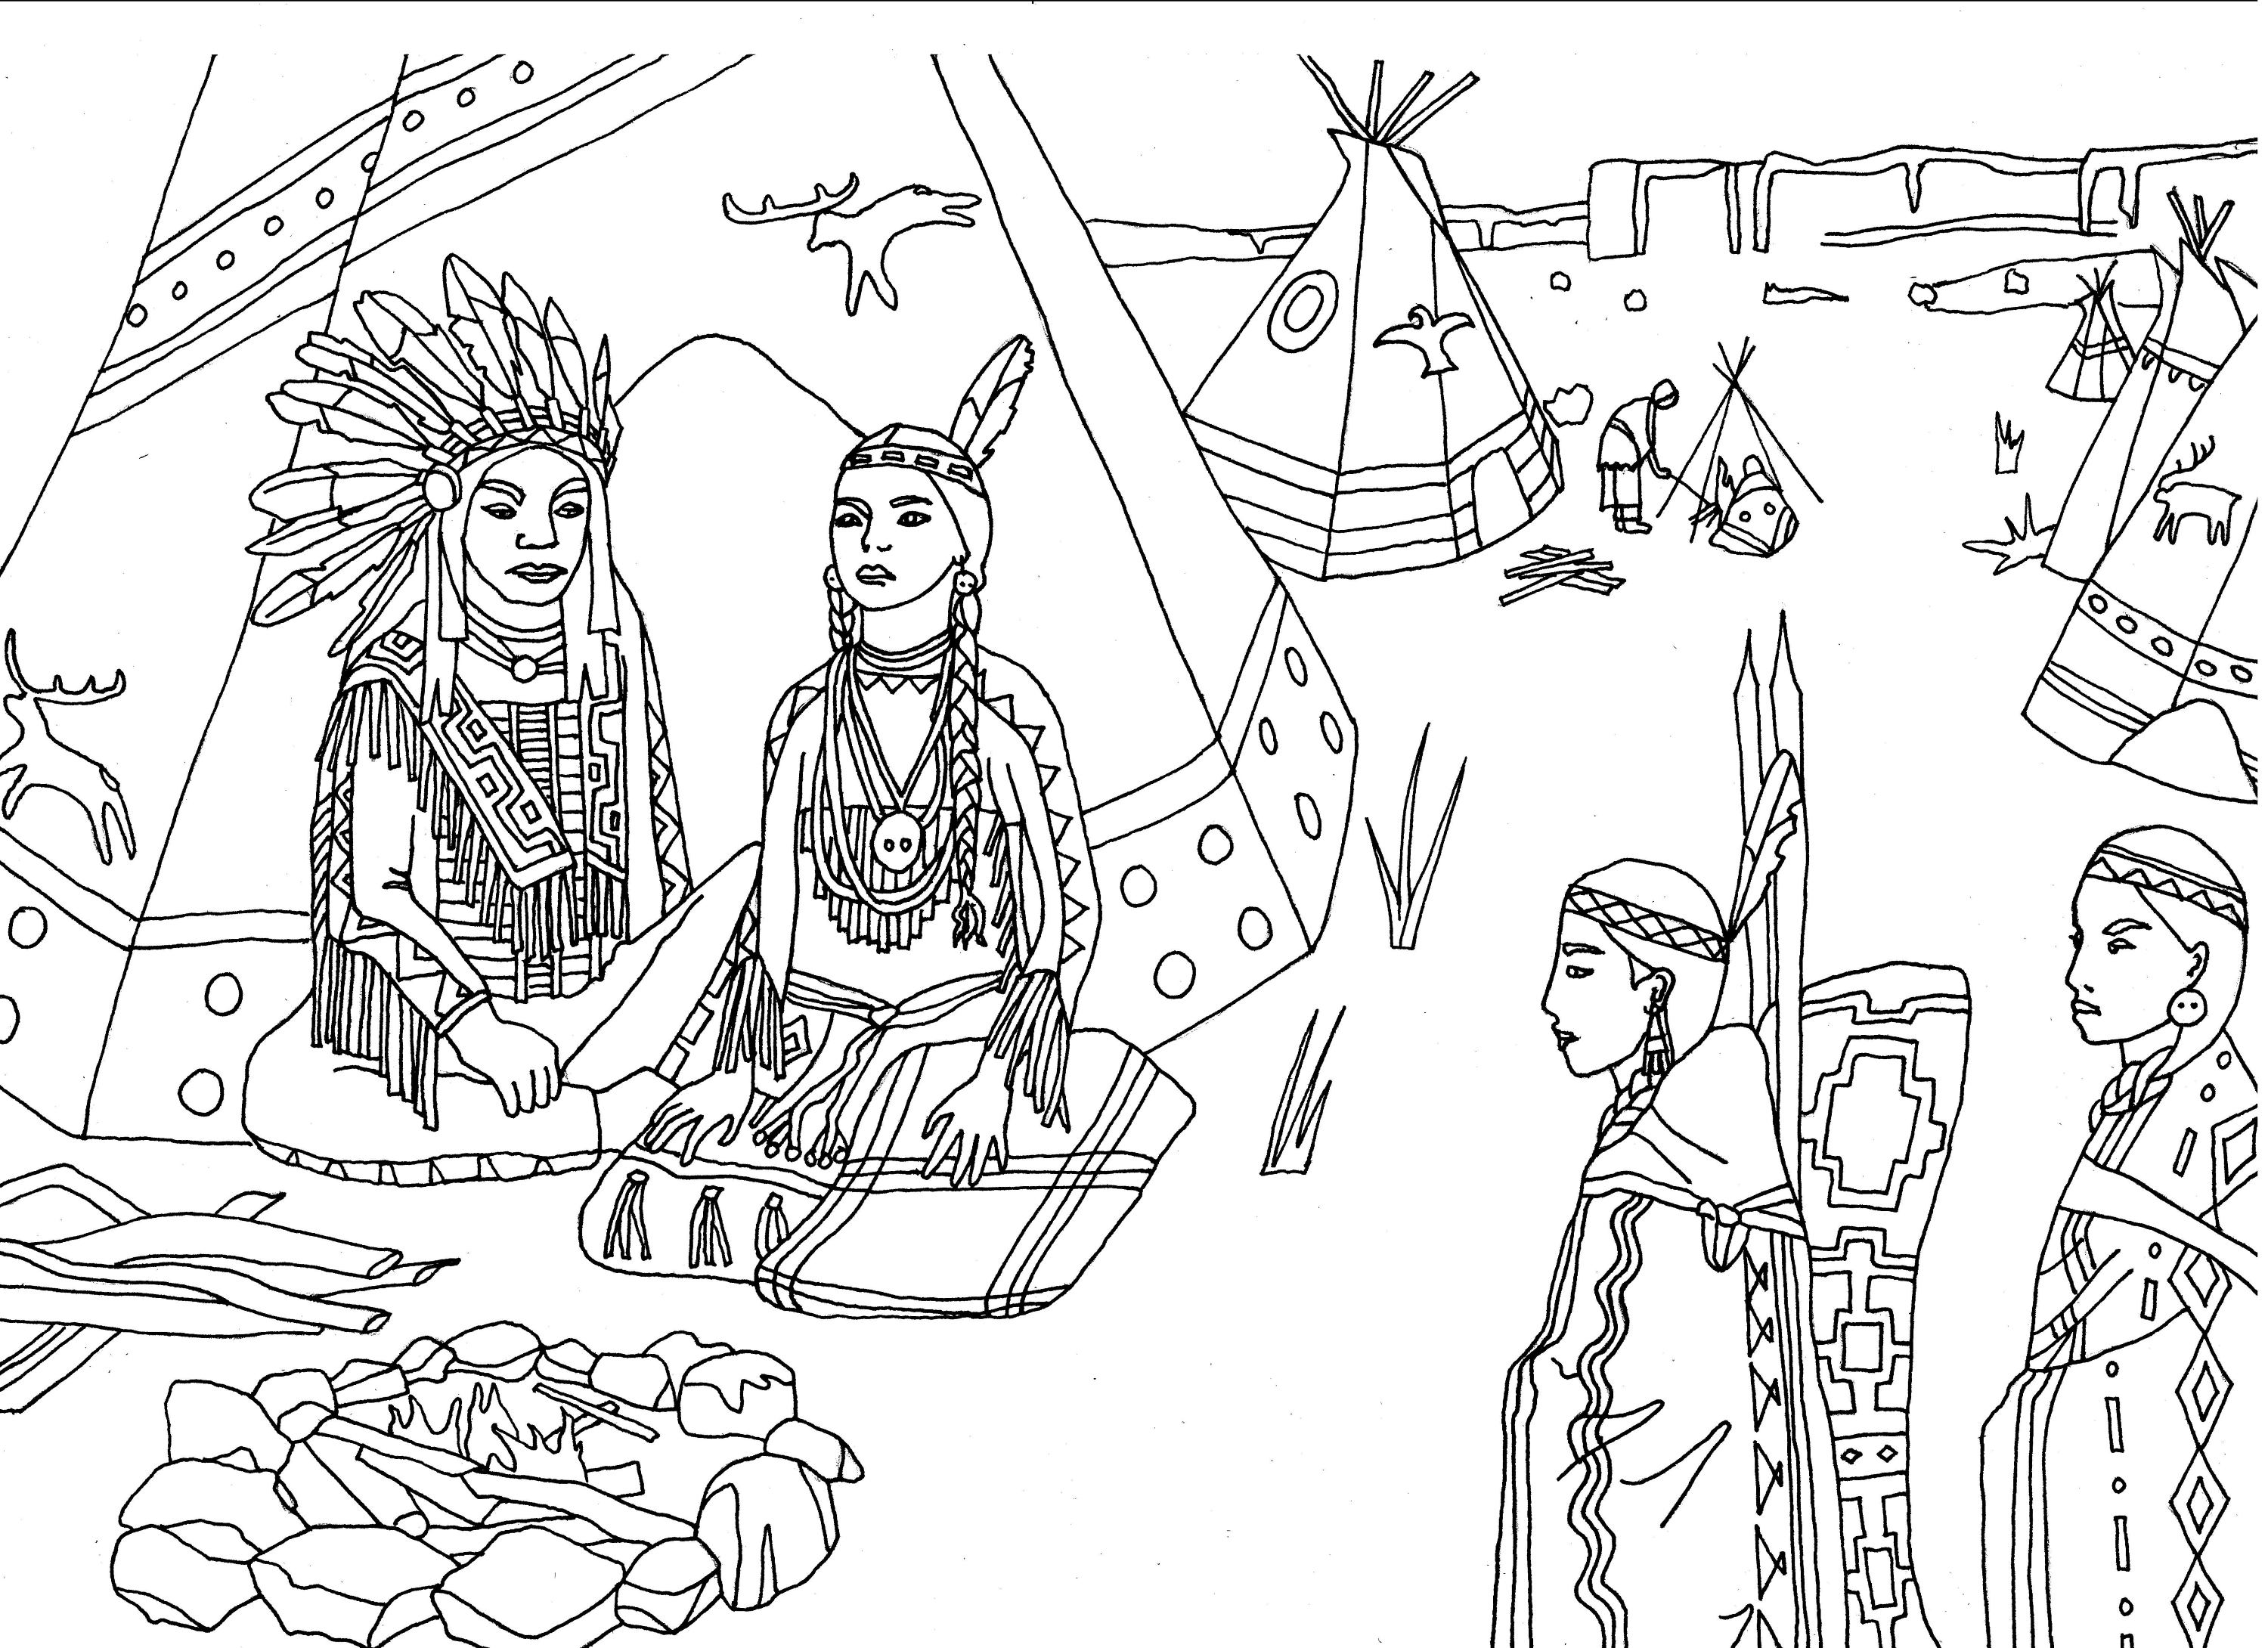 Native Americans (Indians) sat in front of a tepee, Artist : Marion C